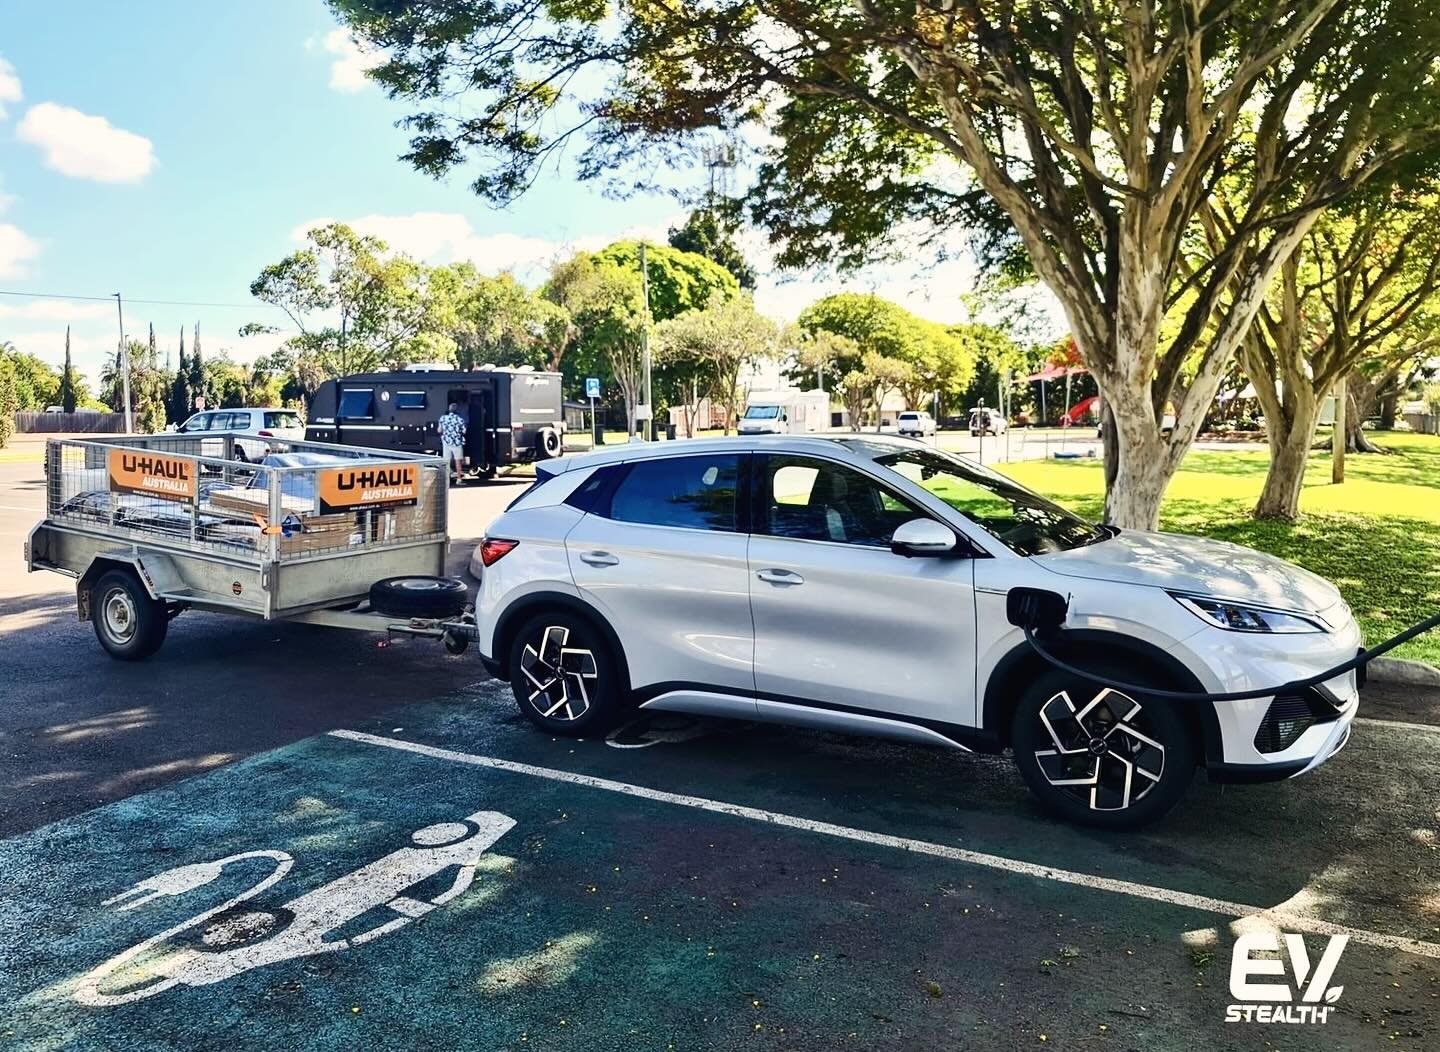 The advantage of charging with the #bydatto3 when you have a trailer. #neverunhook 
.
.
.
.
.
#evstealthsolutions #evtowing #evtowbars  #sustainabletransport #emobility #evstealth #electriccarsaustralia #electricvehicles #stealthmode #electricvehicle